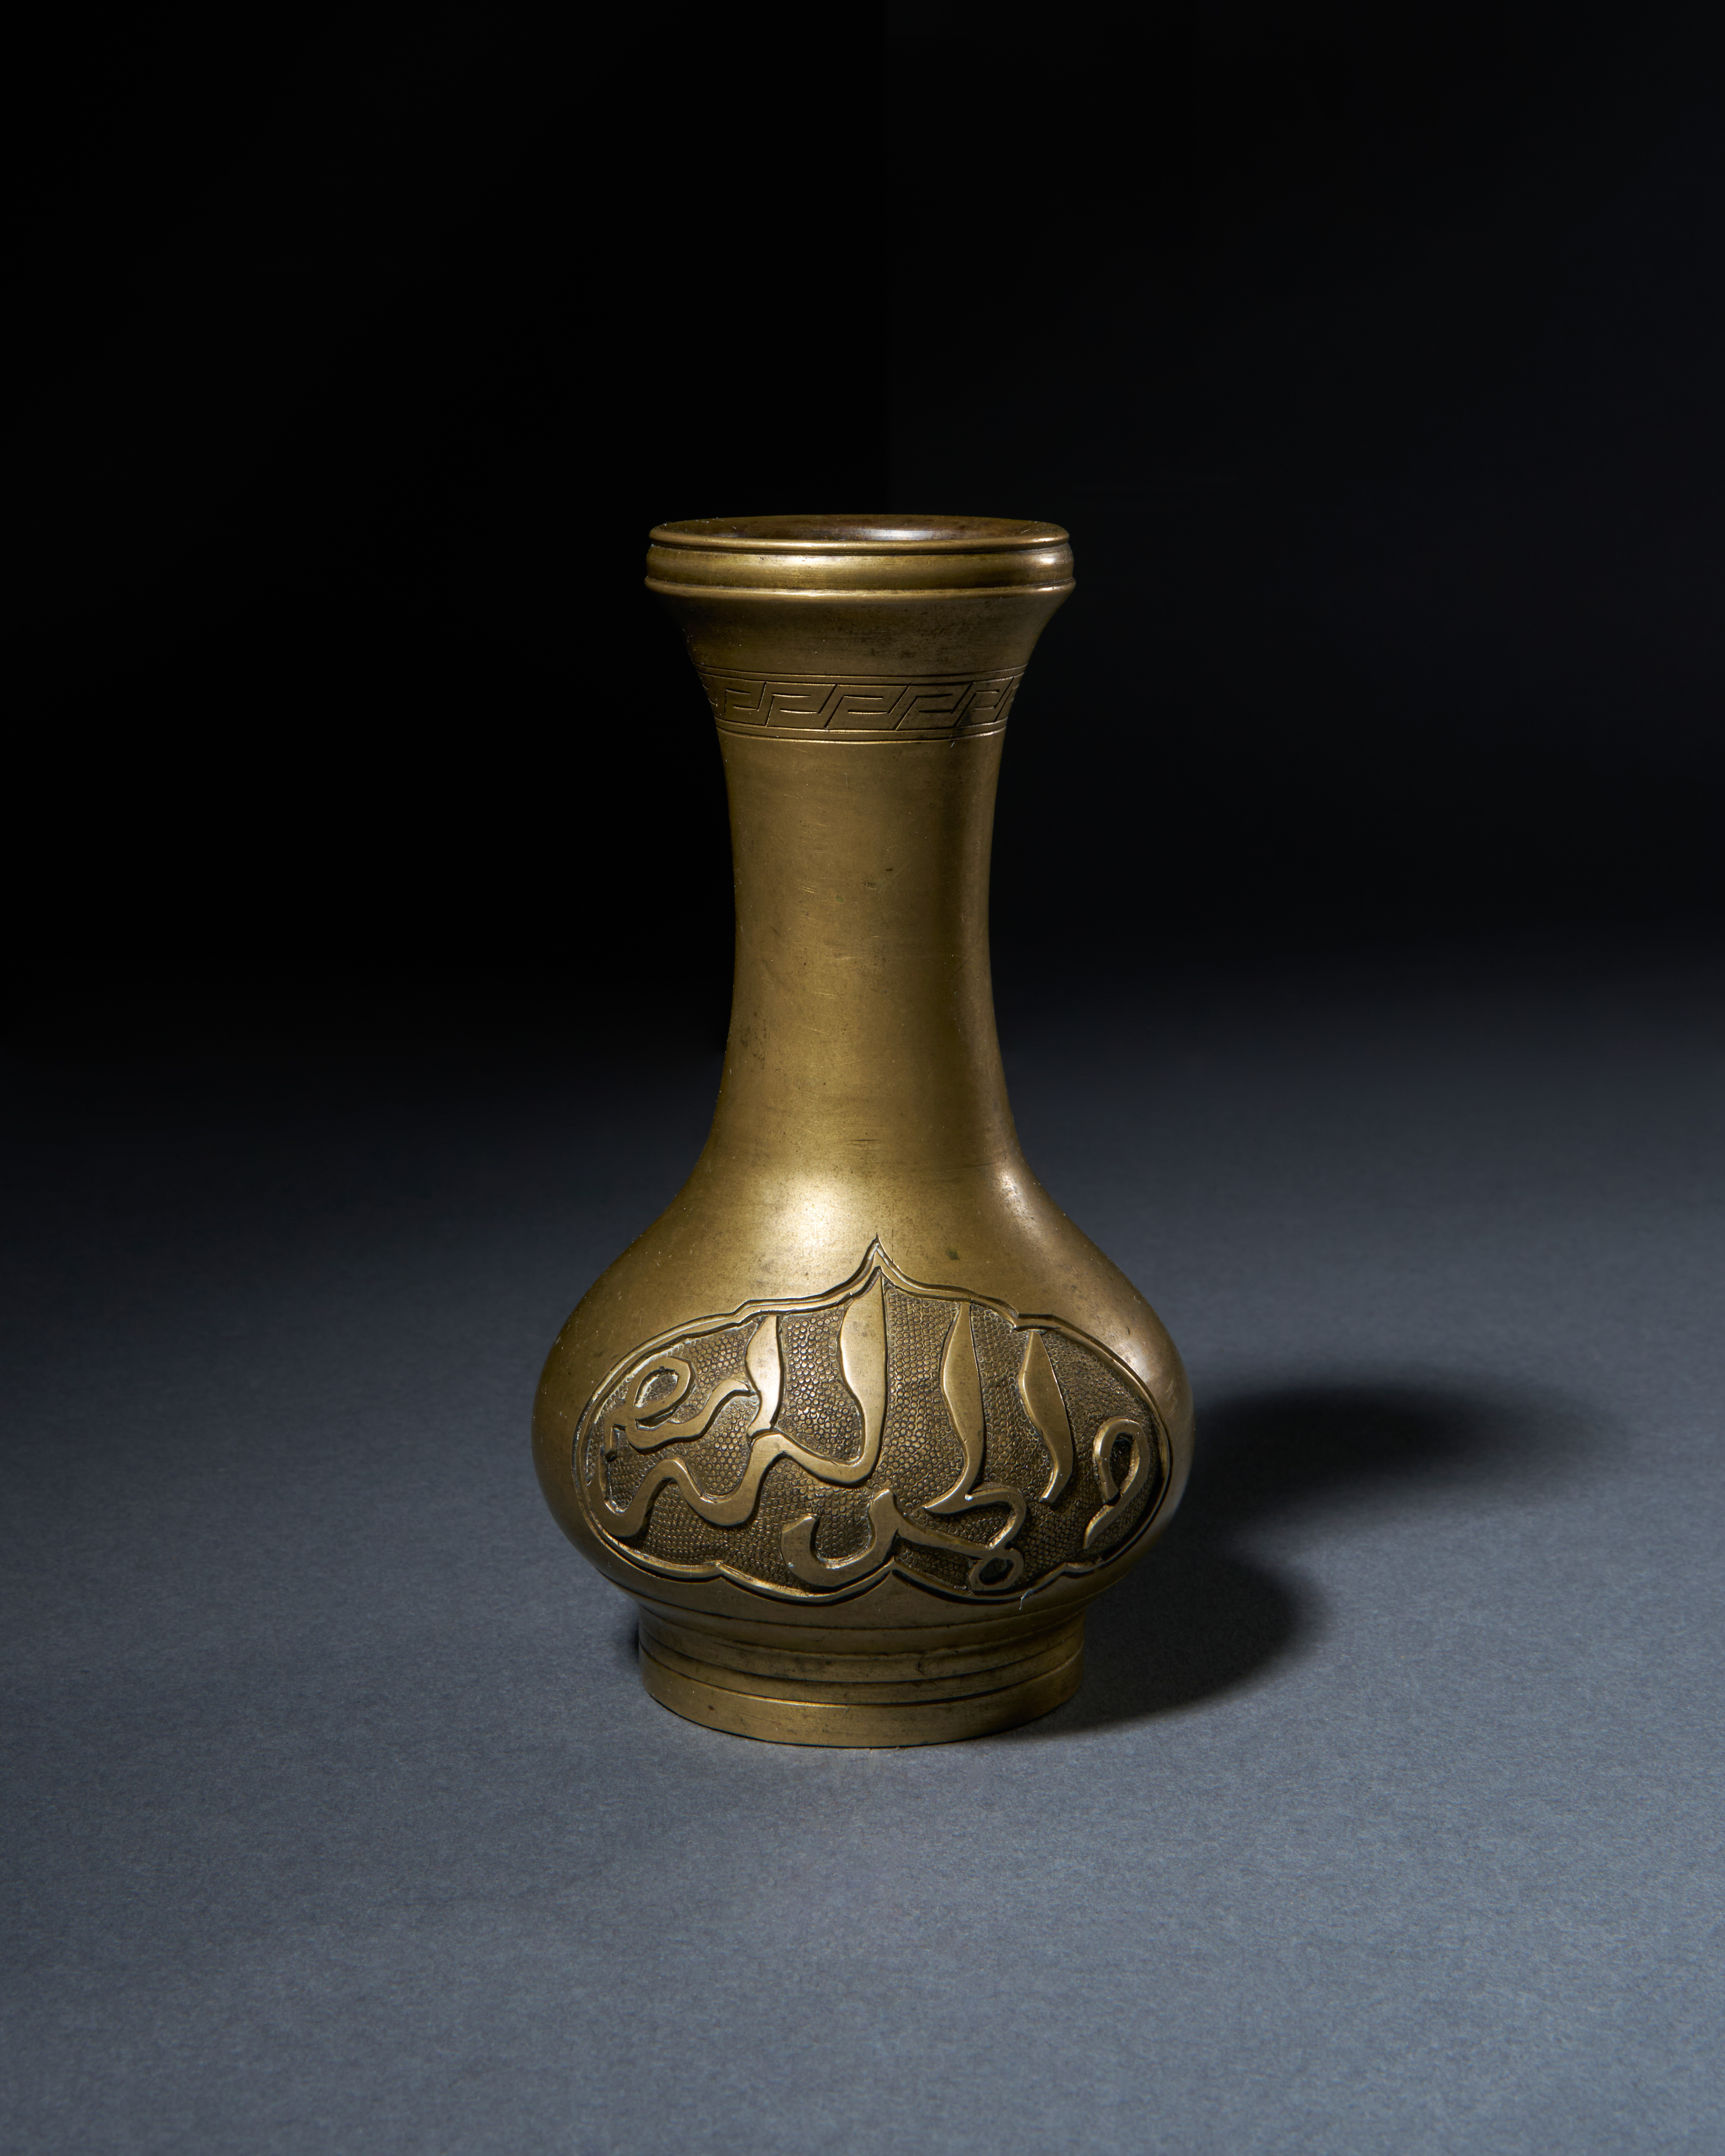 A BRONZE INCENSE VASE WITH ARABIC INSCRIPTIONS, 17TH/18TH CENTURY - Image 2 of 3